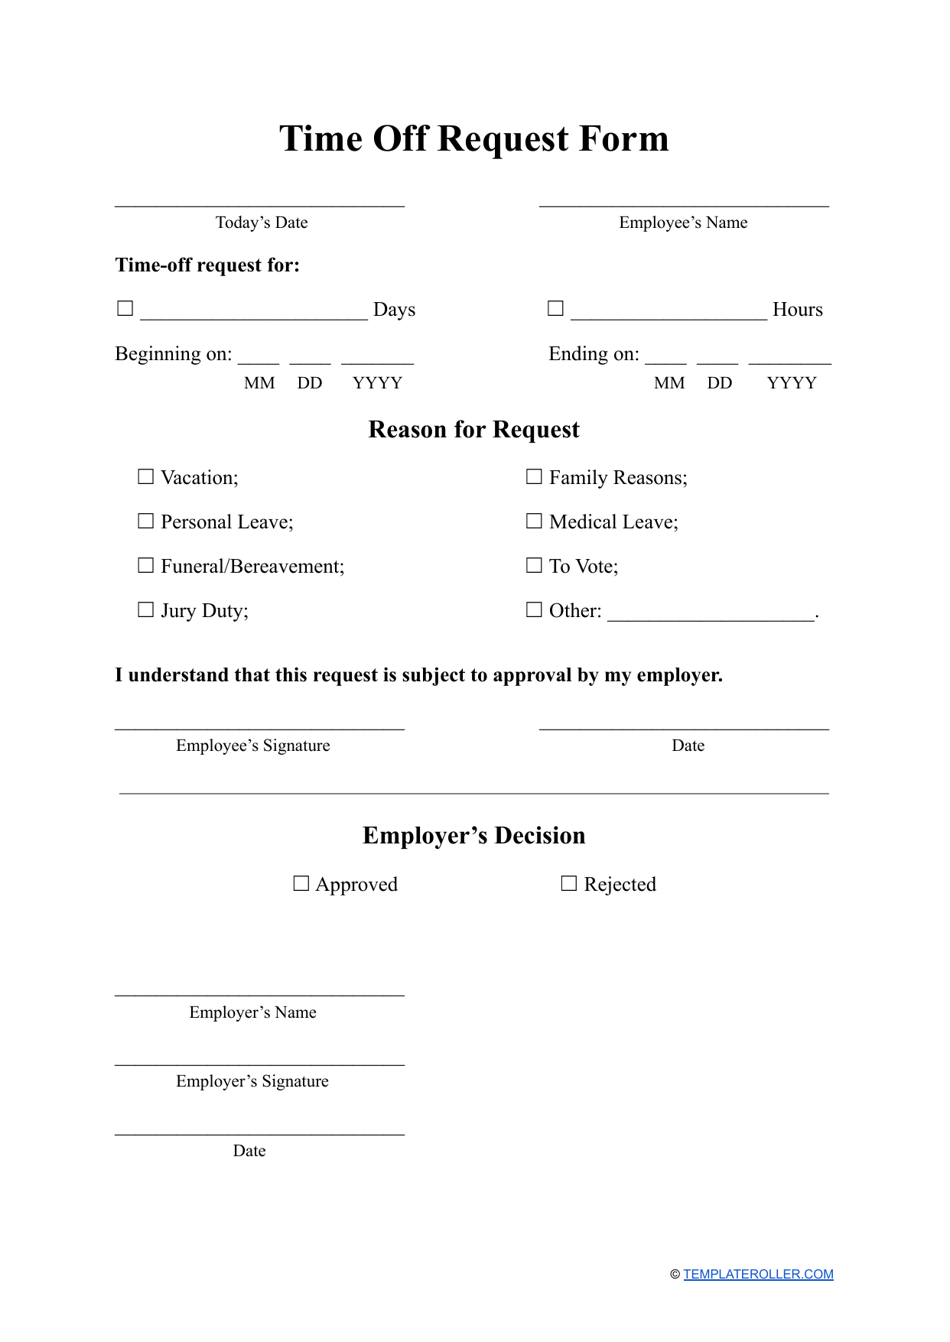 Time Off Request Form Fill Out Sign Online And Download Pdf